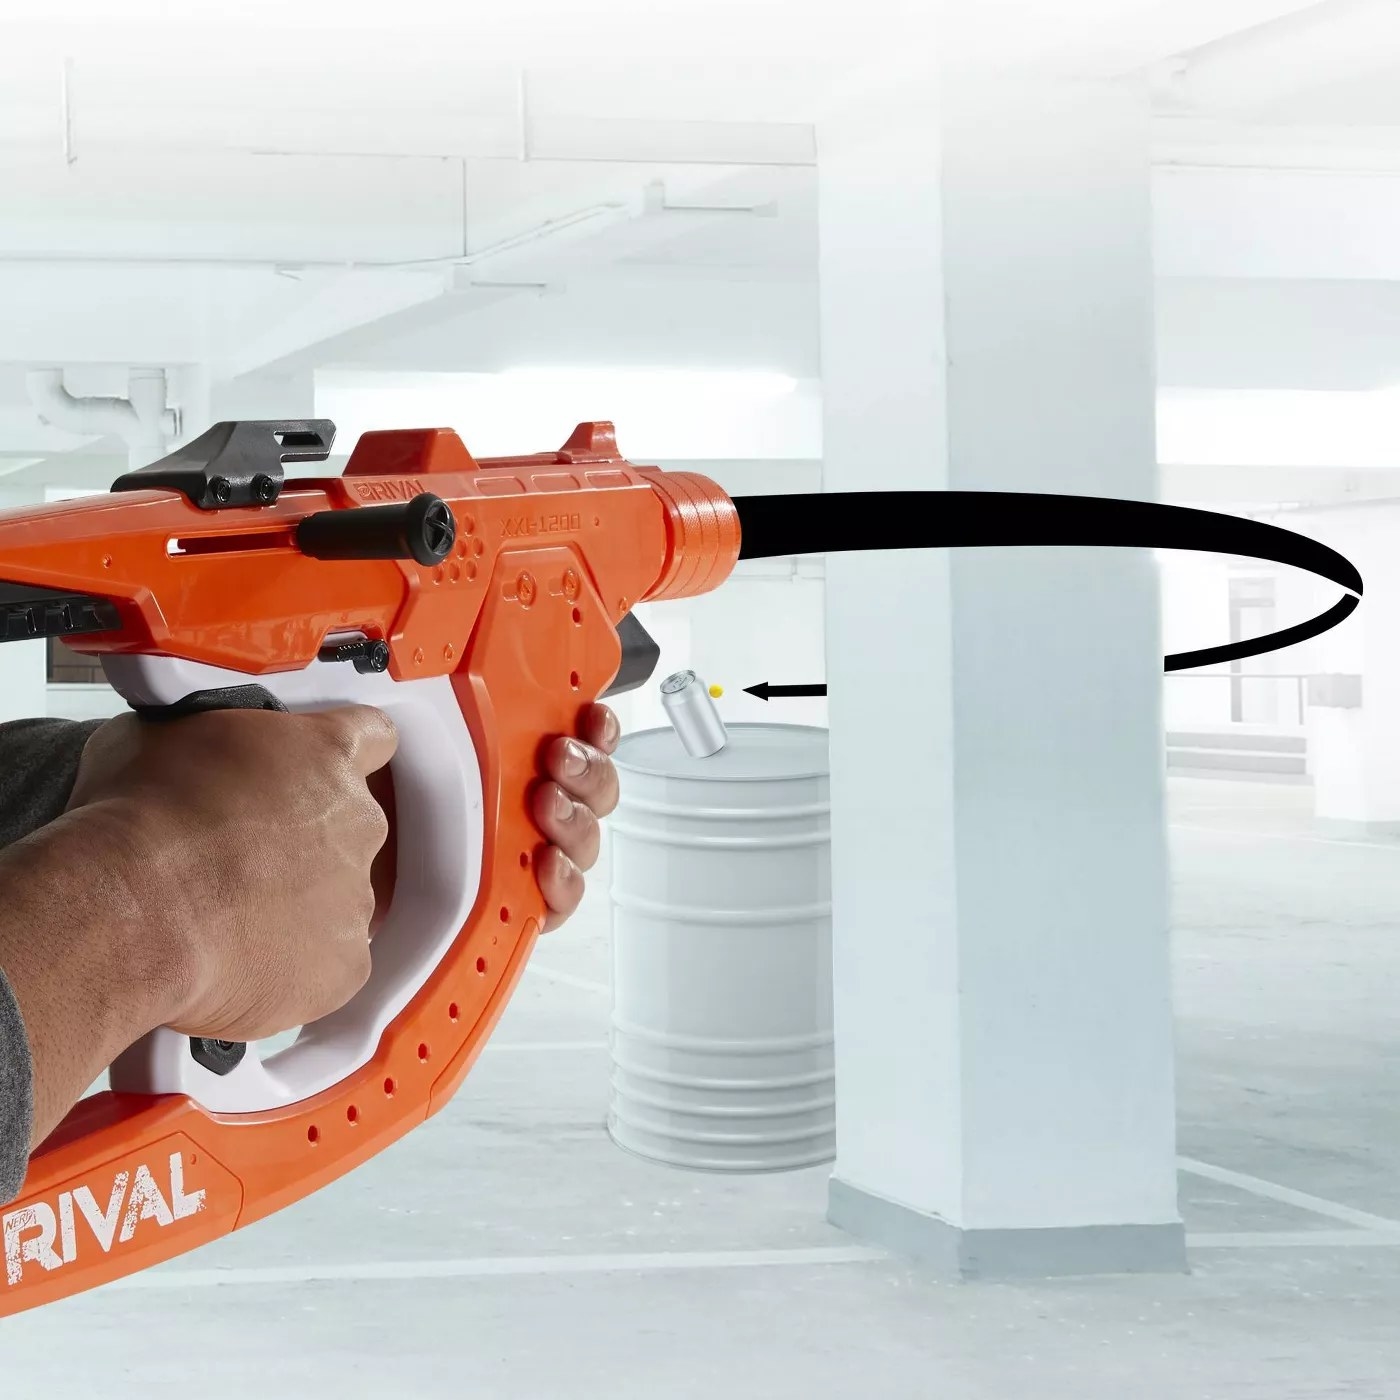 The Rival Blaster shooting a curved bullet